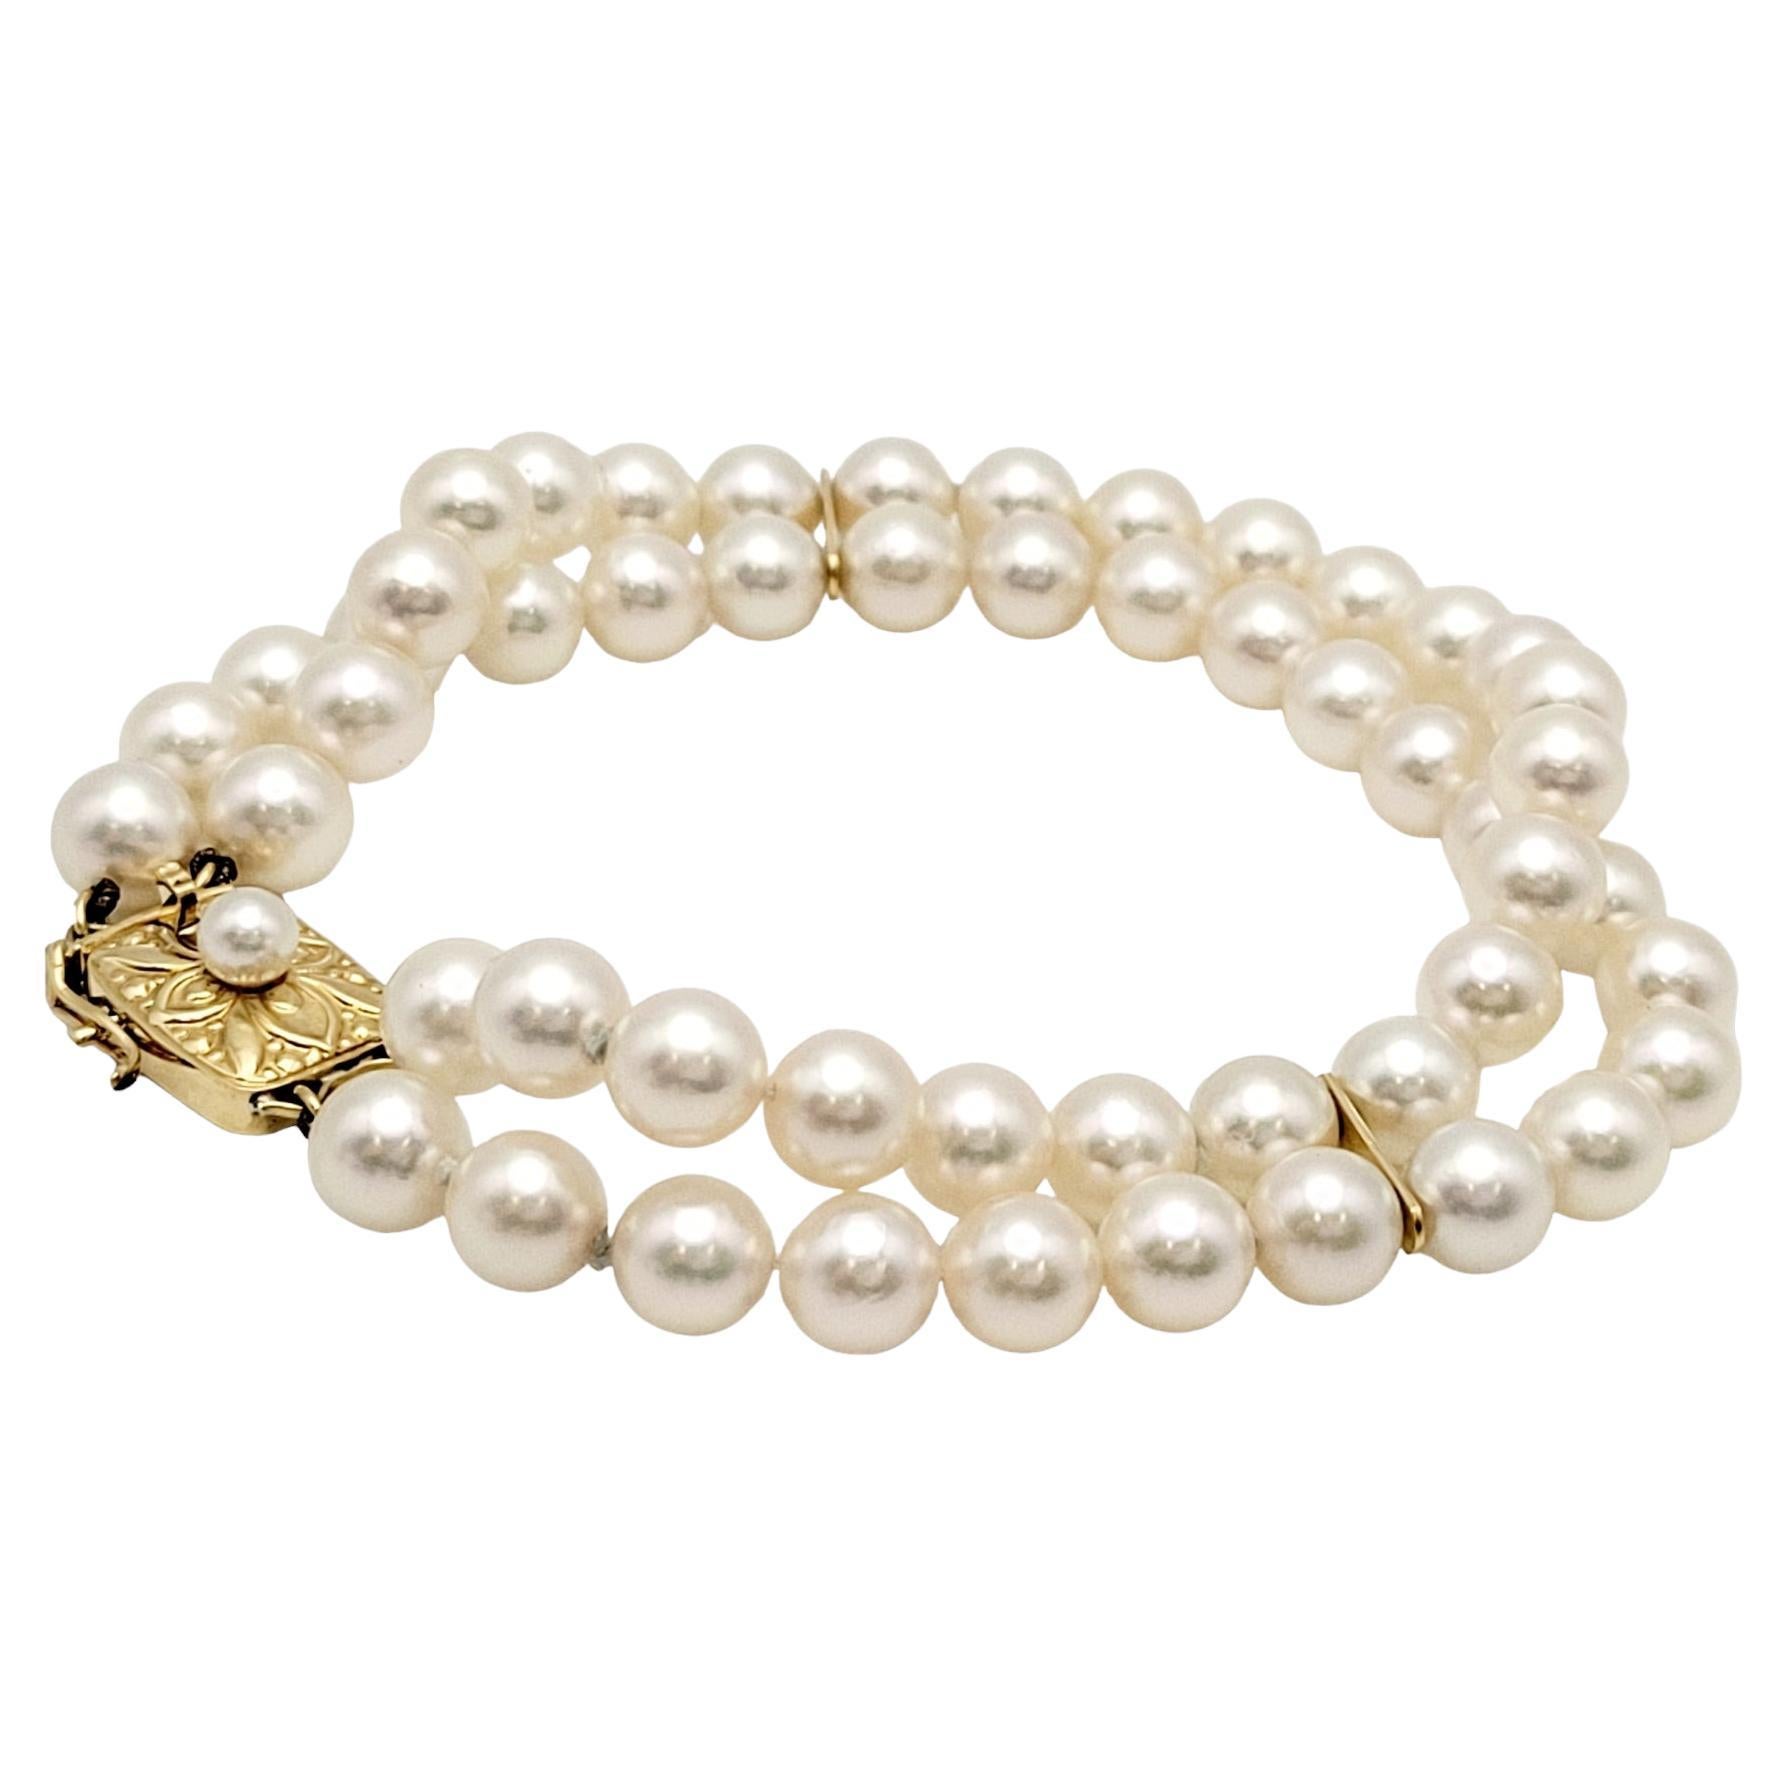 This timeless bracelet displays a harmonious fusion of classic pearls and opulent 18-karat yellow gold. The bracelet features a double strand of lustrous pearls, each one meticulously selected for its radiant sheen and uniformity. Interspersed along